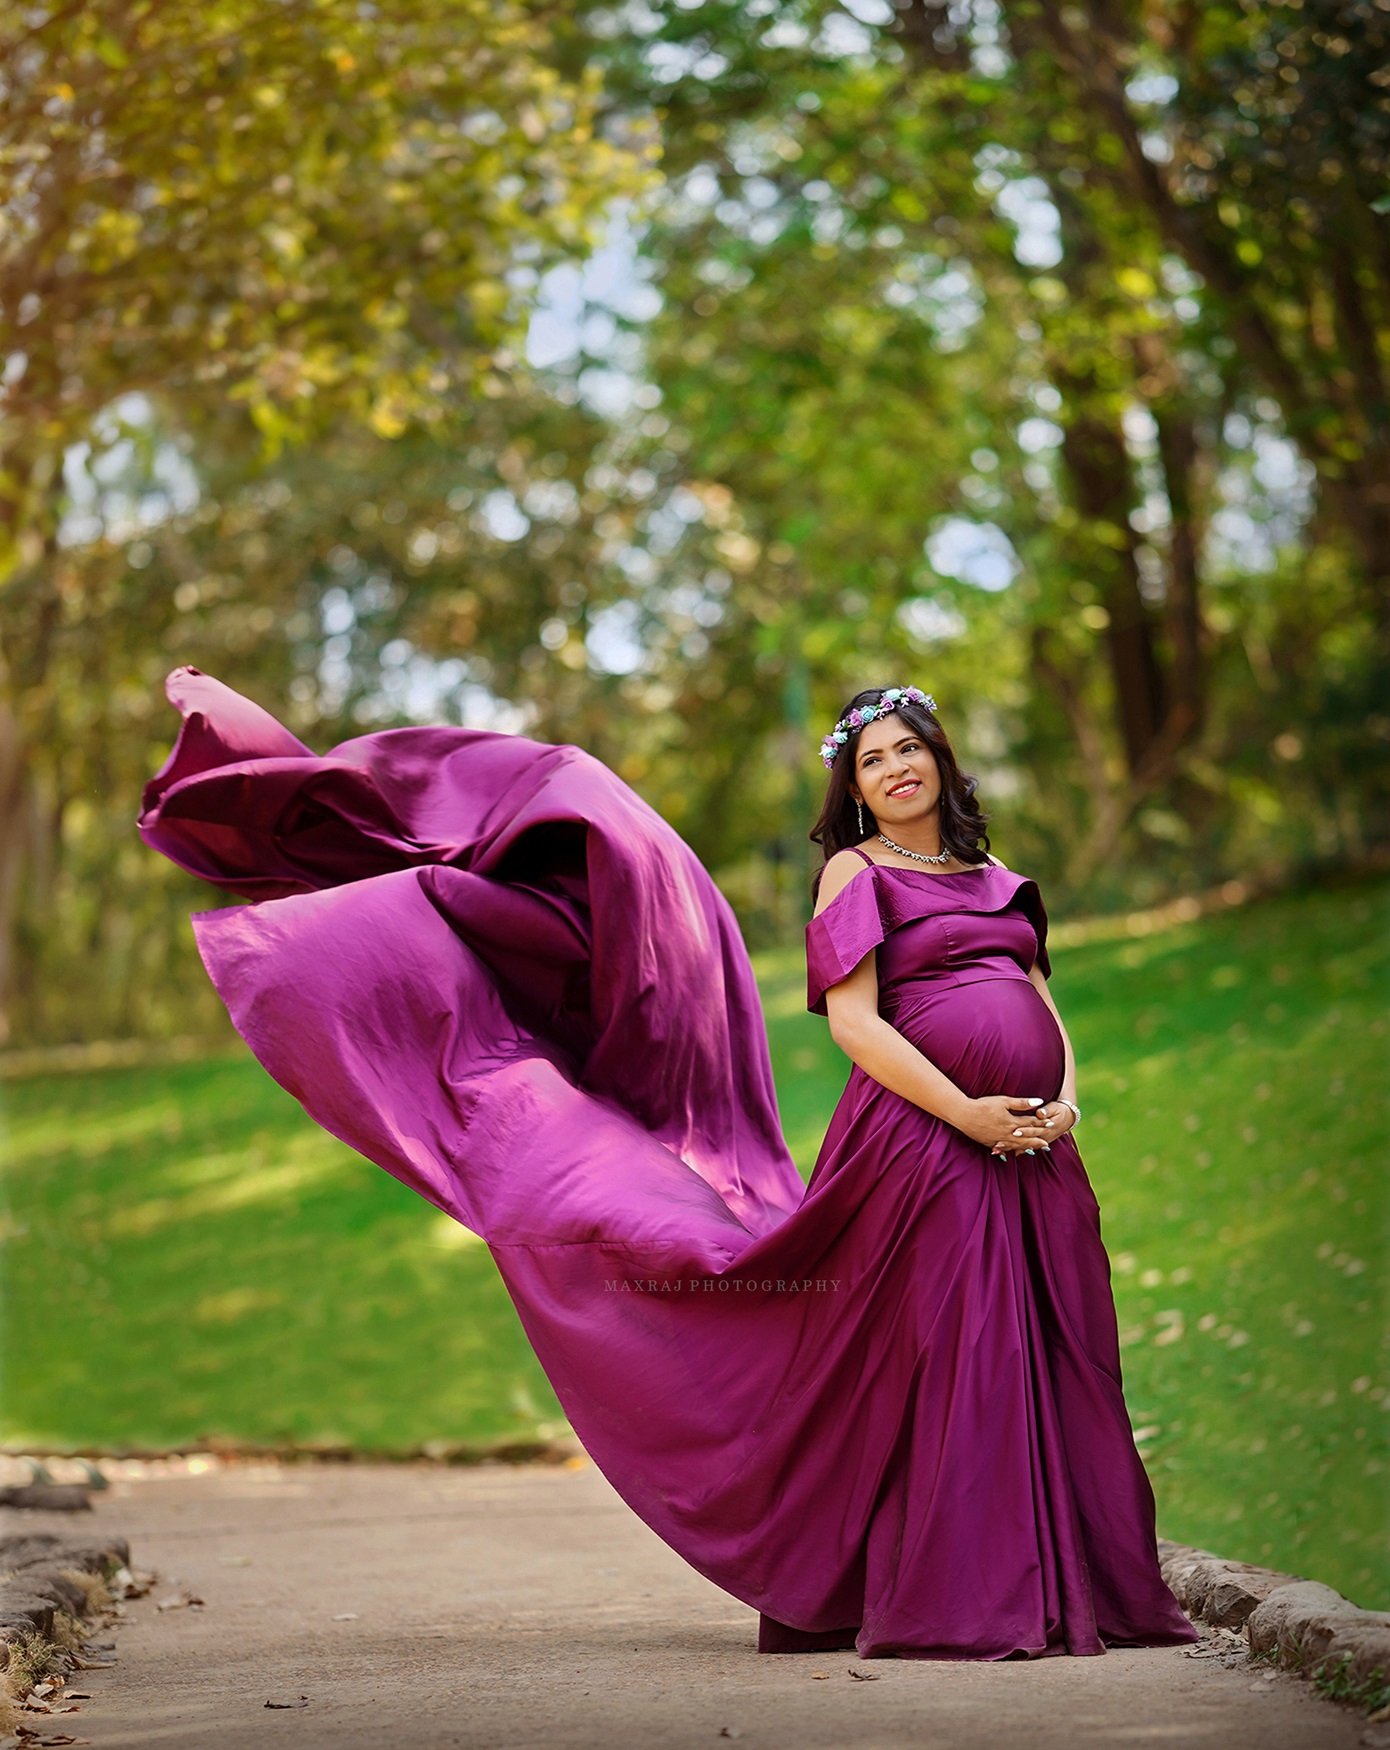 Maternity photoshoot of Pregnant woman in pune in purple flowing gown , maternity photoshoot poses , best maternity photoshoot ideas